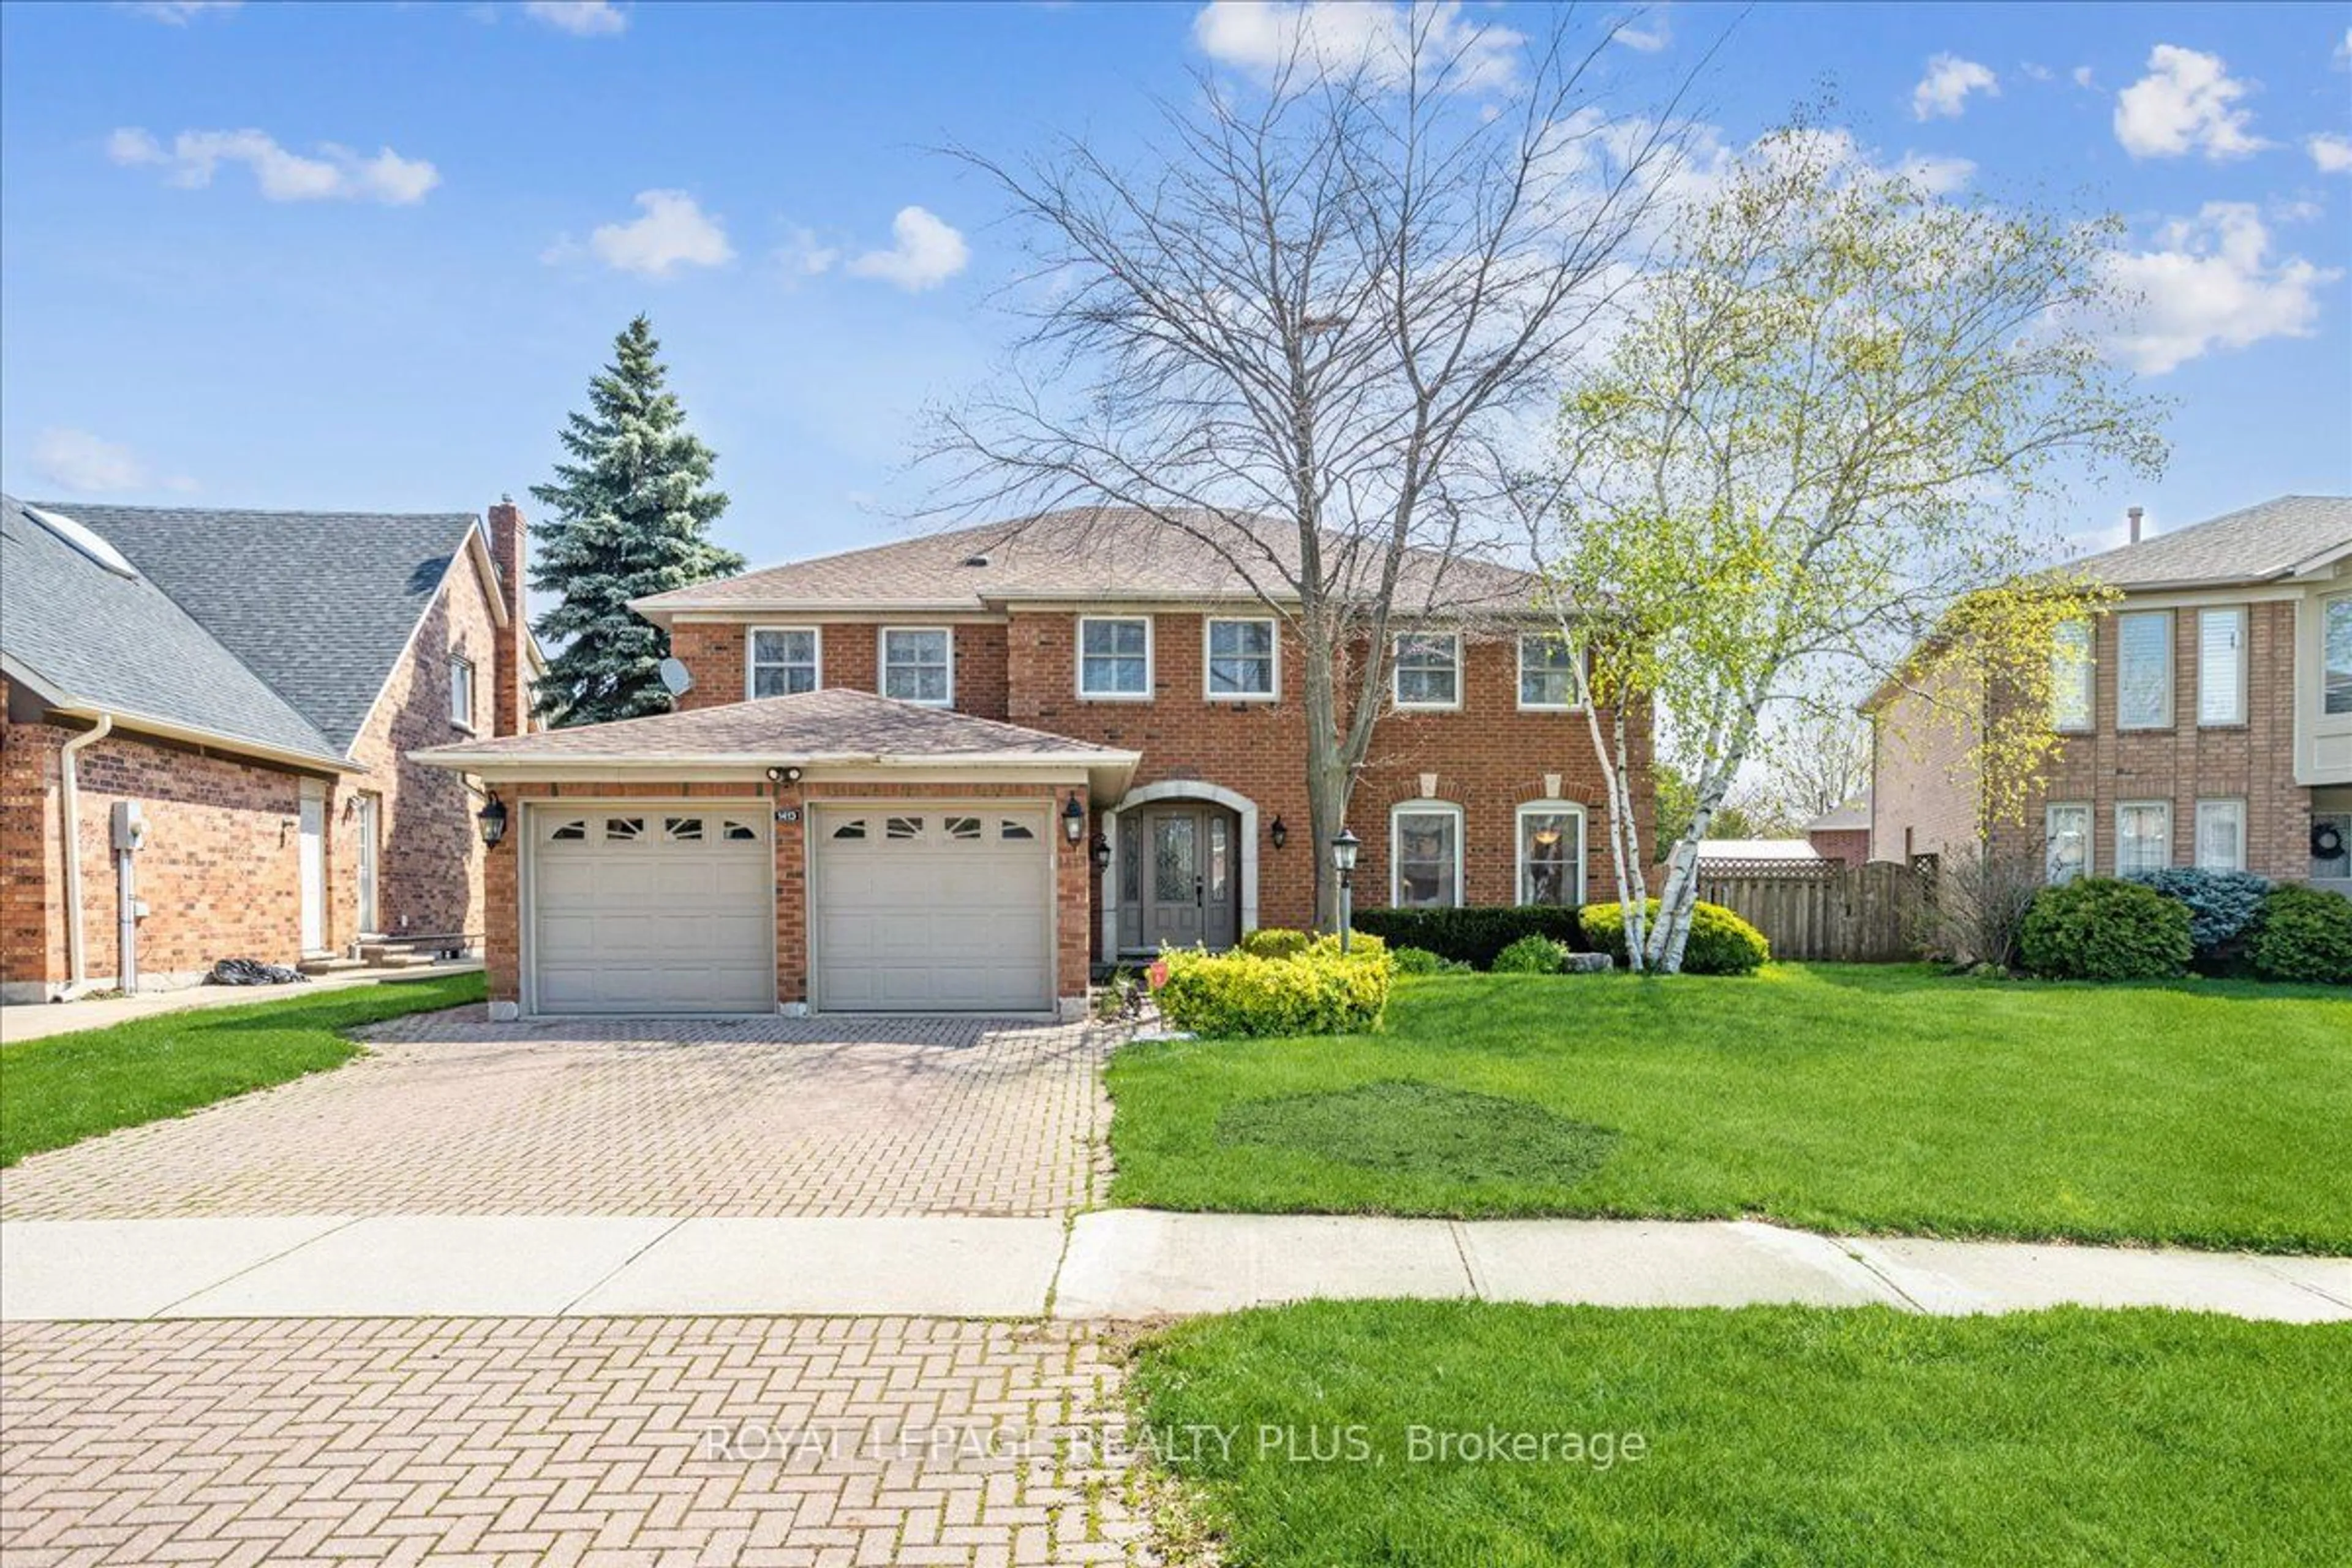 Home with brick exterior material for 1413 Thistledown Rd, Oakville Ontario L6M 1Y4